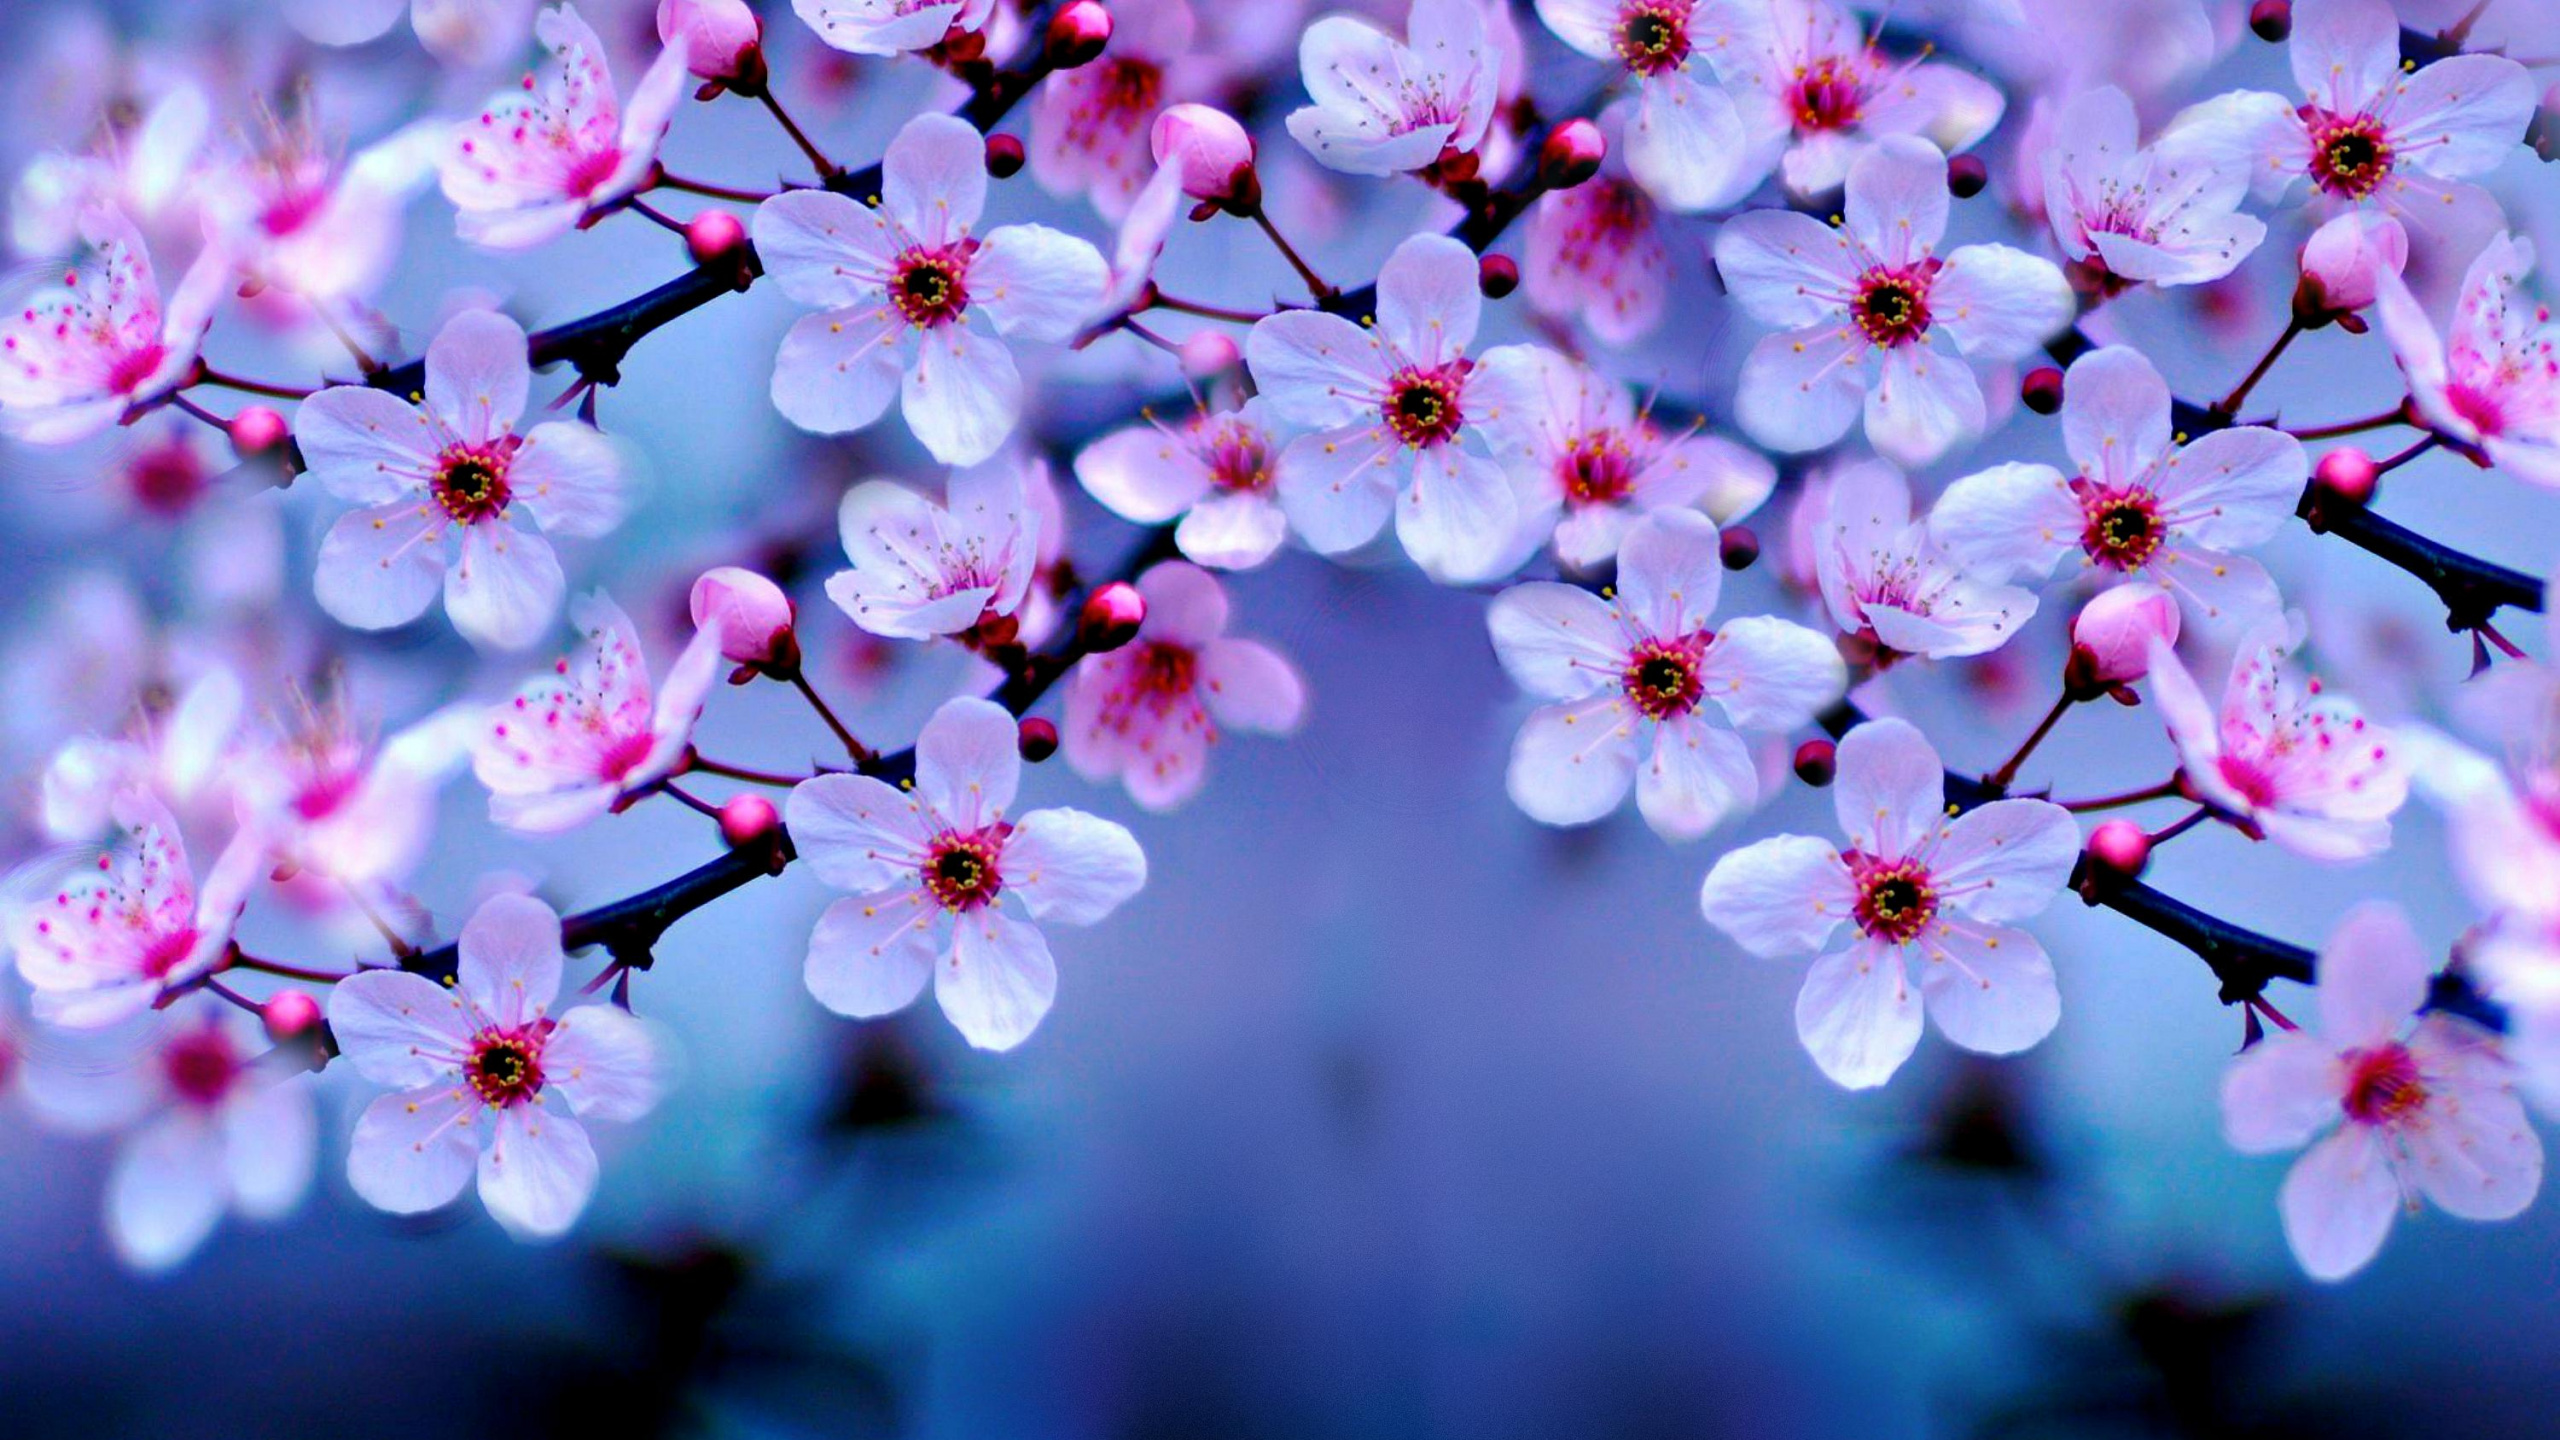 White and Pink Cherry Blossom in Close up Photography. Wallpaper in 2560x1440 Resolution